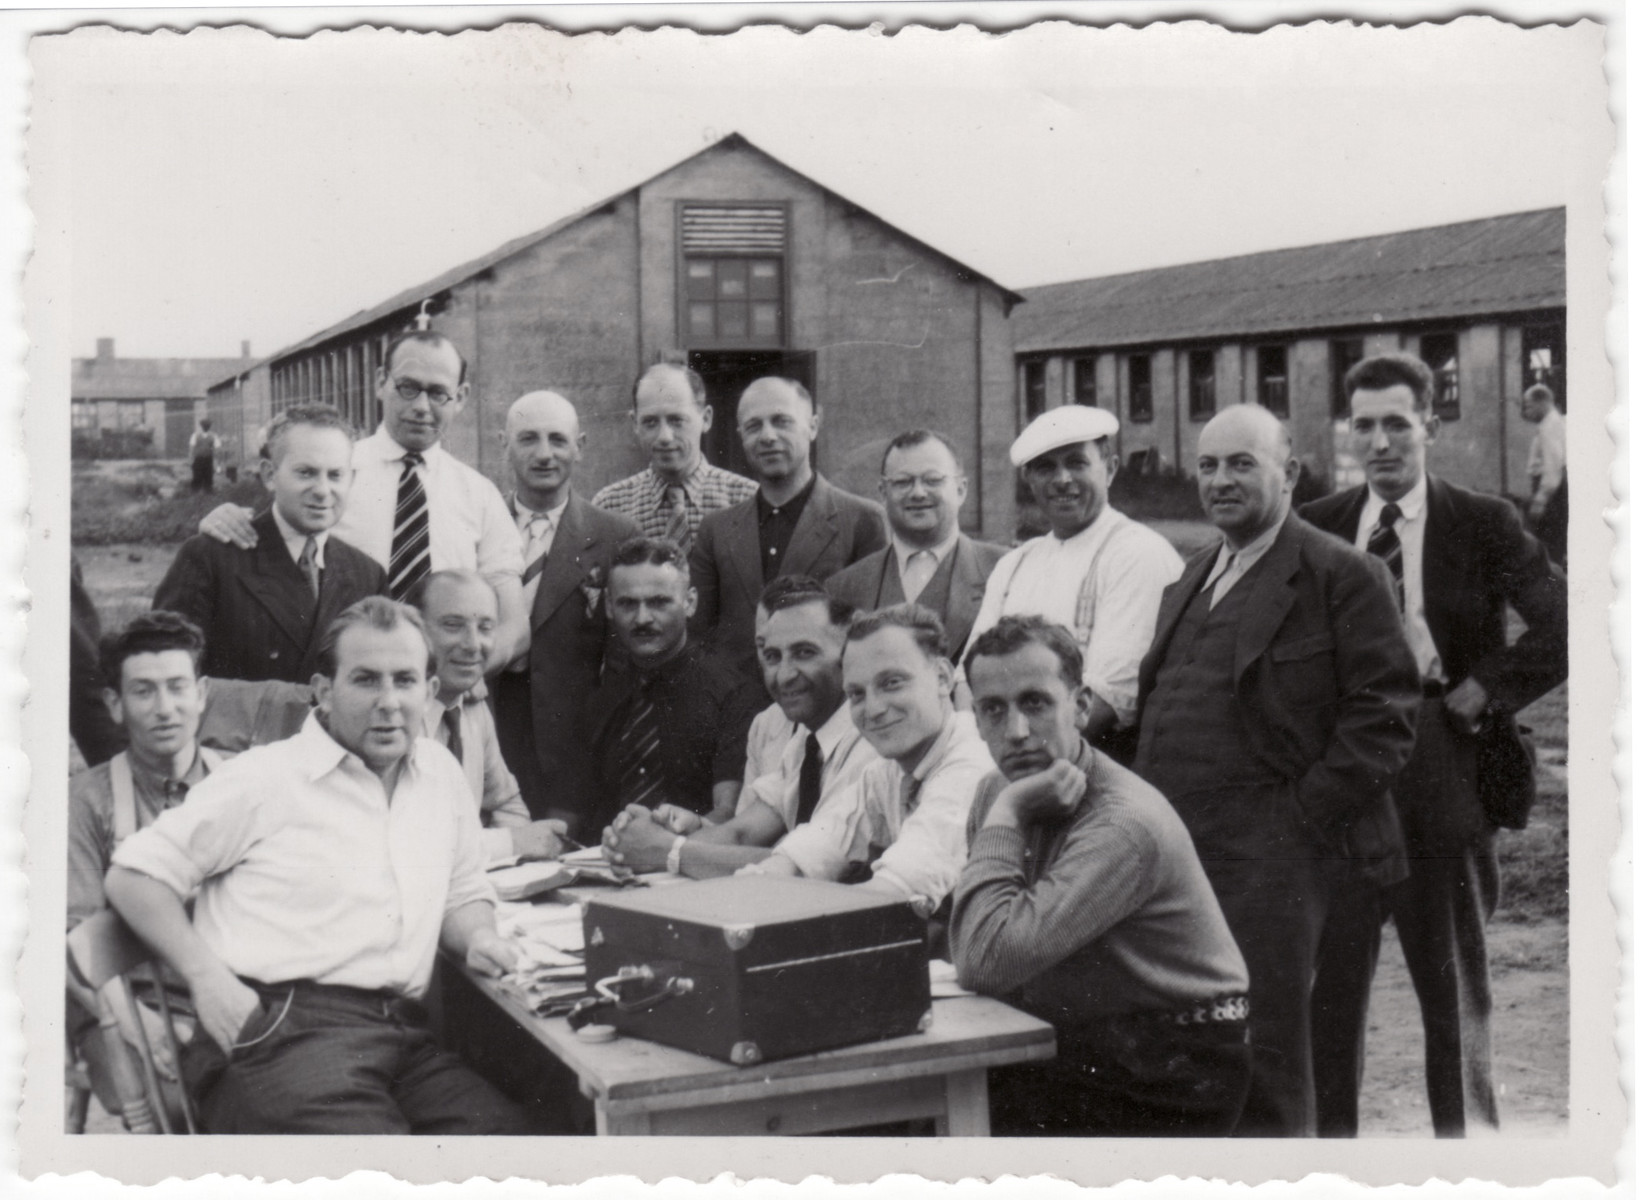 Jewish refugees gather around a record player on top of an outdoor table at the Kitchener refugee camp.

Siegfried Kulmann is pictured in the lower left in a white short sleeve shirt.